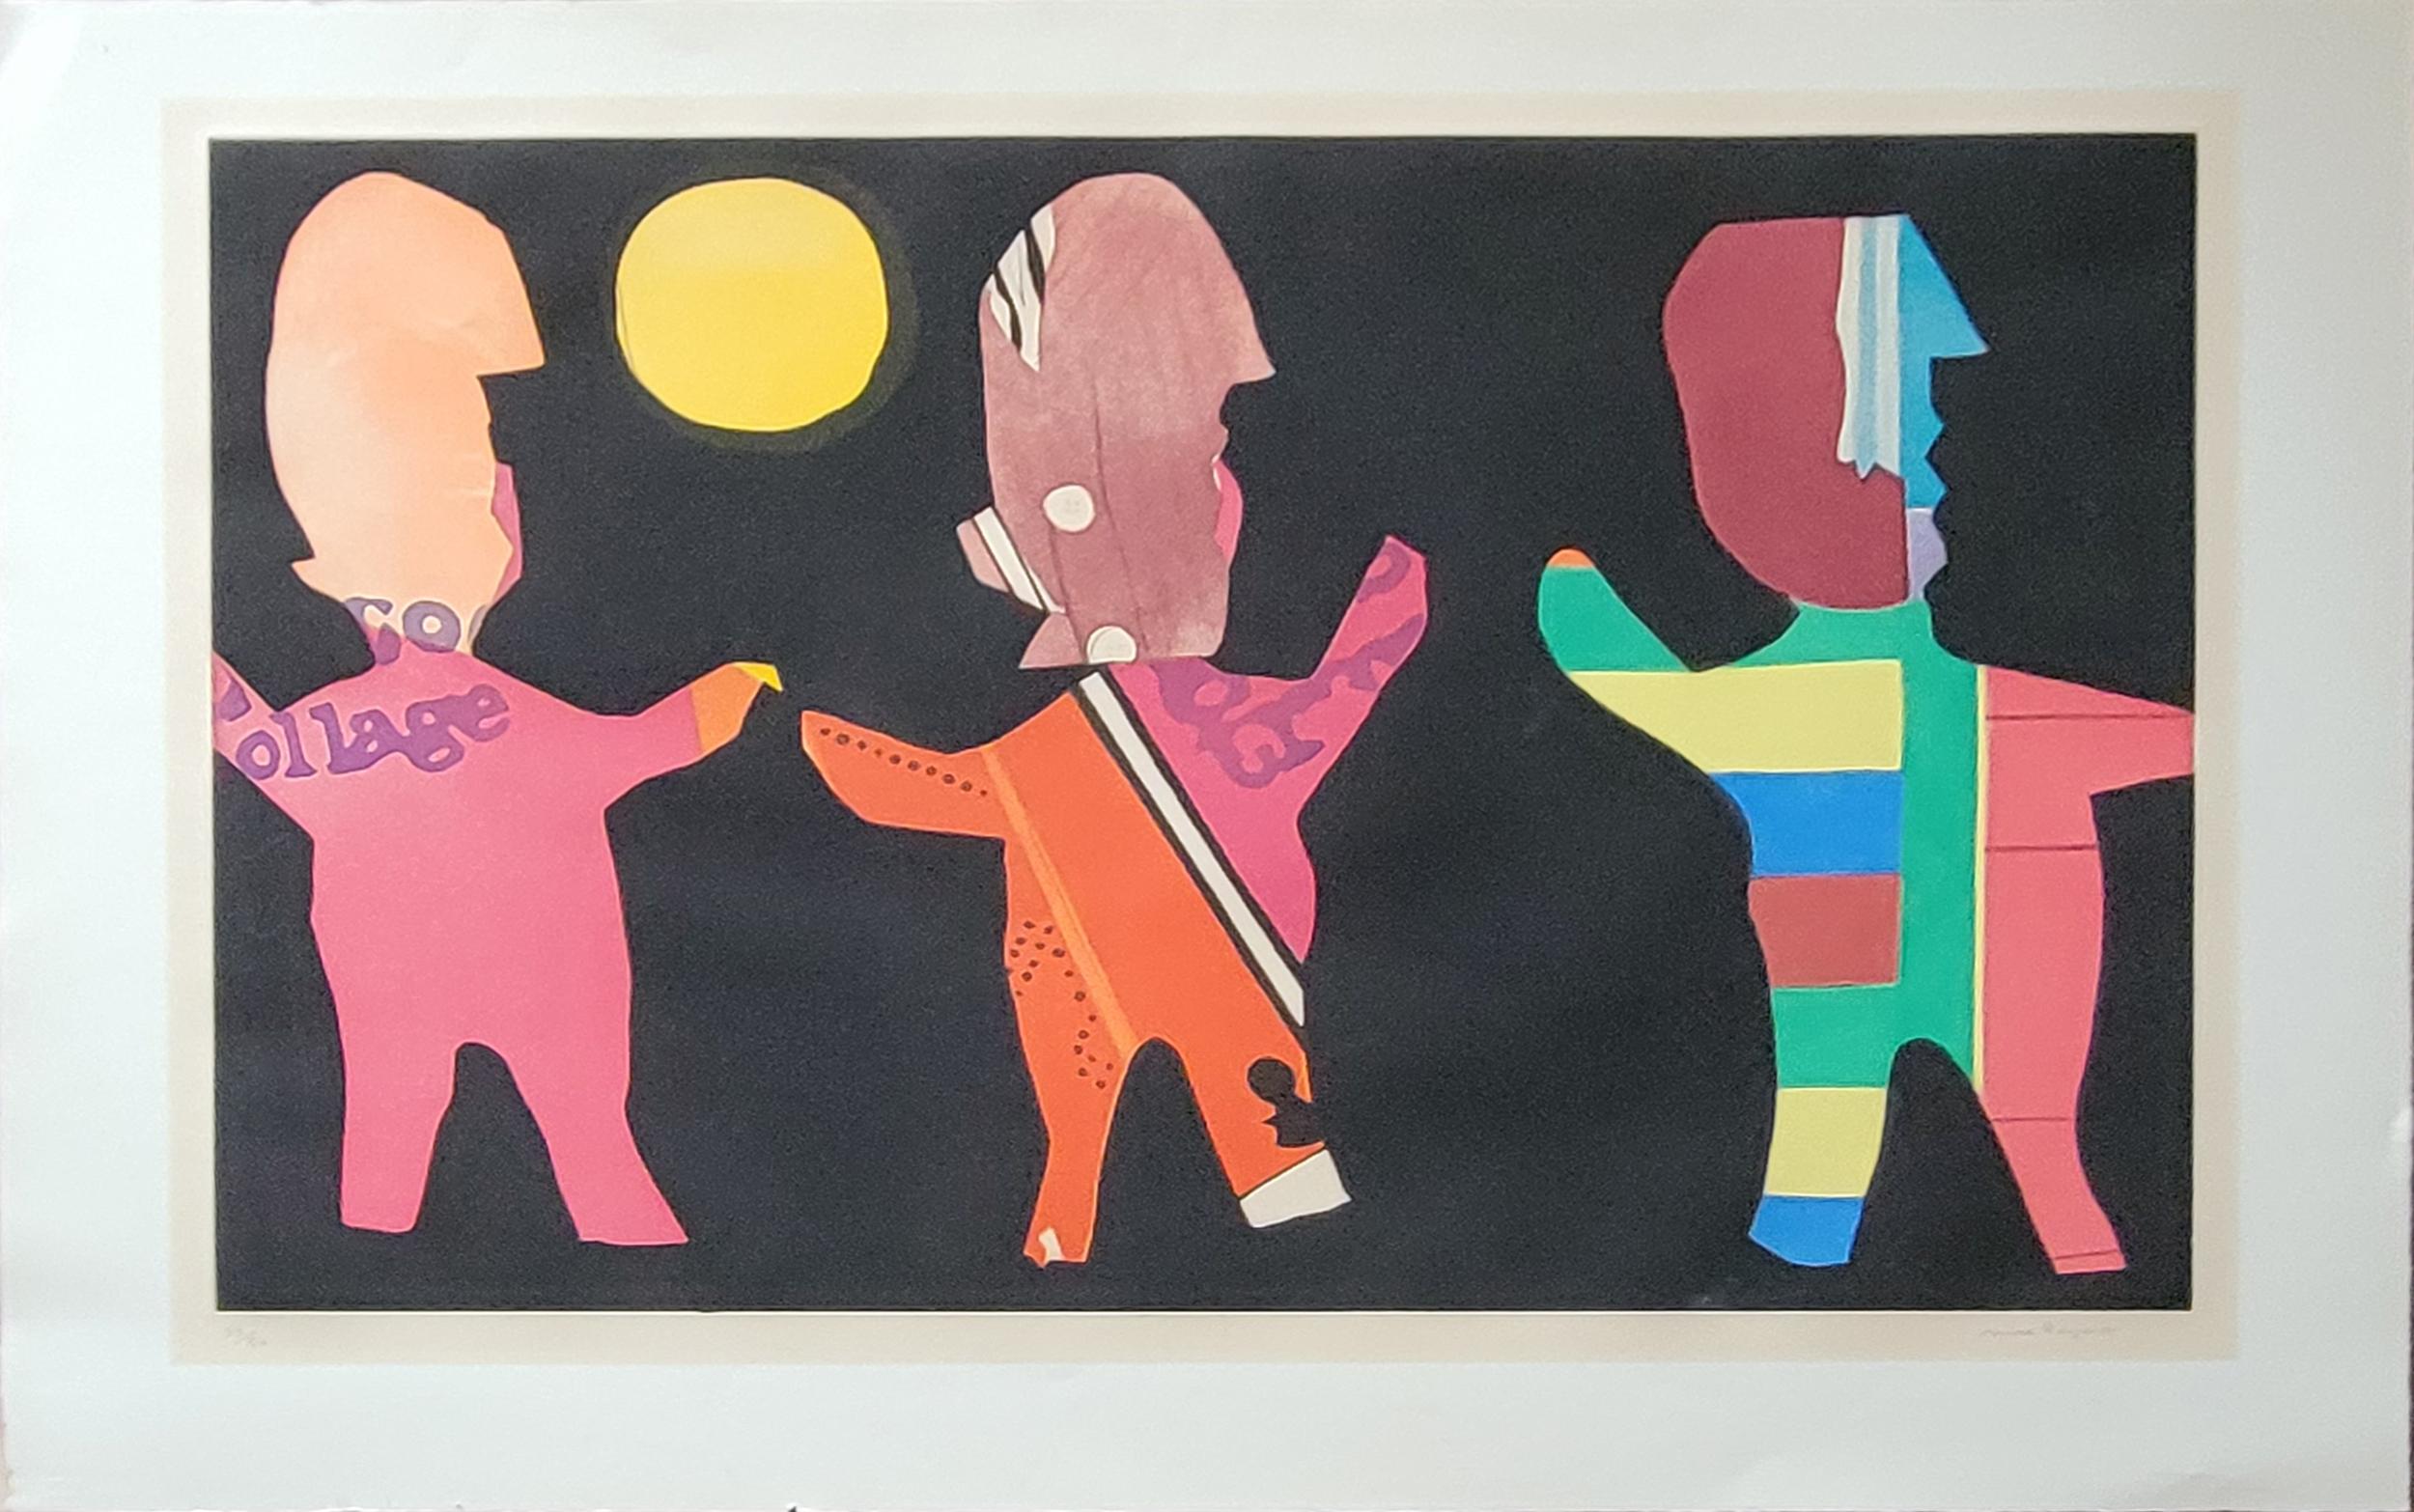 Max Papart's signature style sits between Pop Art and Cubism, using techniques that make many of his works look like collages. This lithograph features three dancing figures against a black background, all moving towards the sun. The work is signed